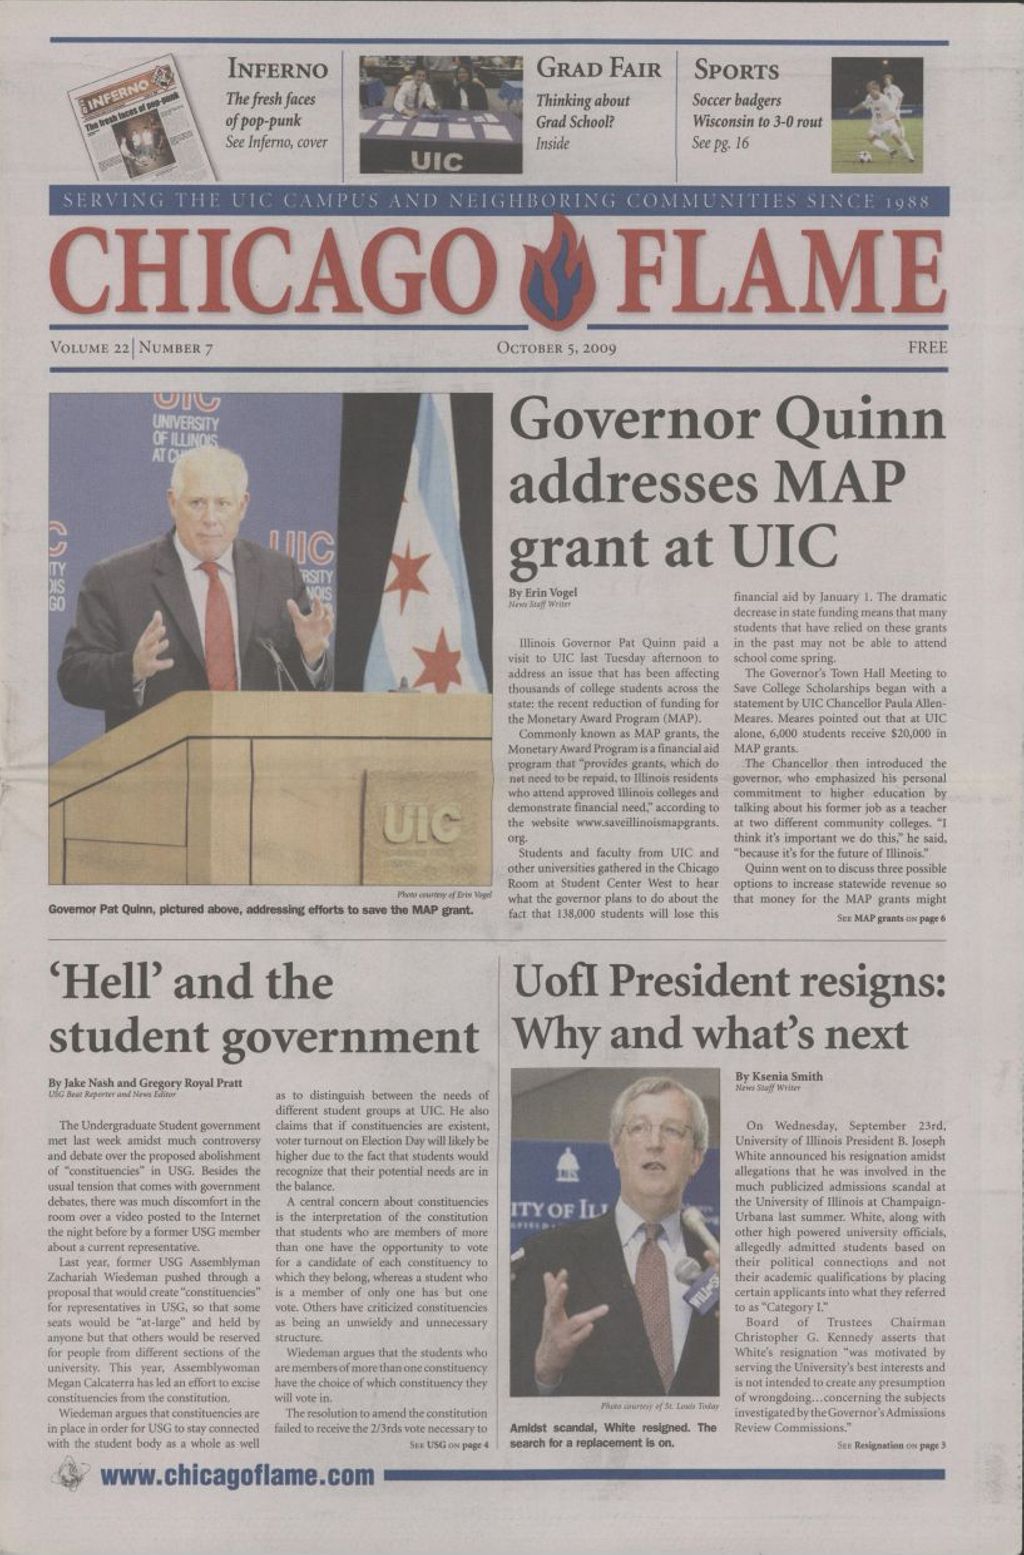 Chicago Flame (October 5, 2009)